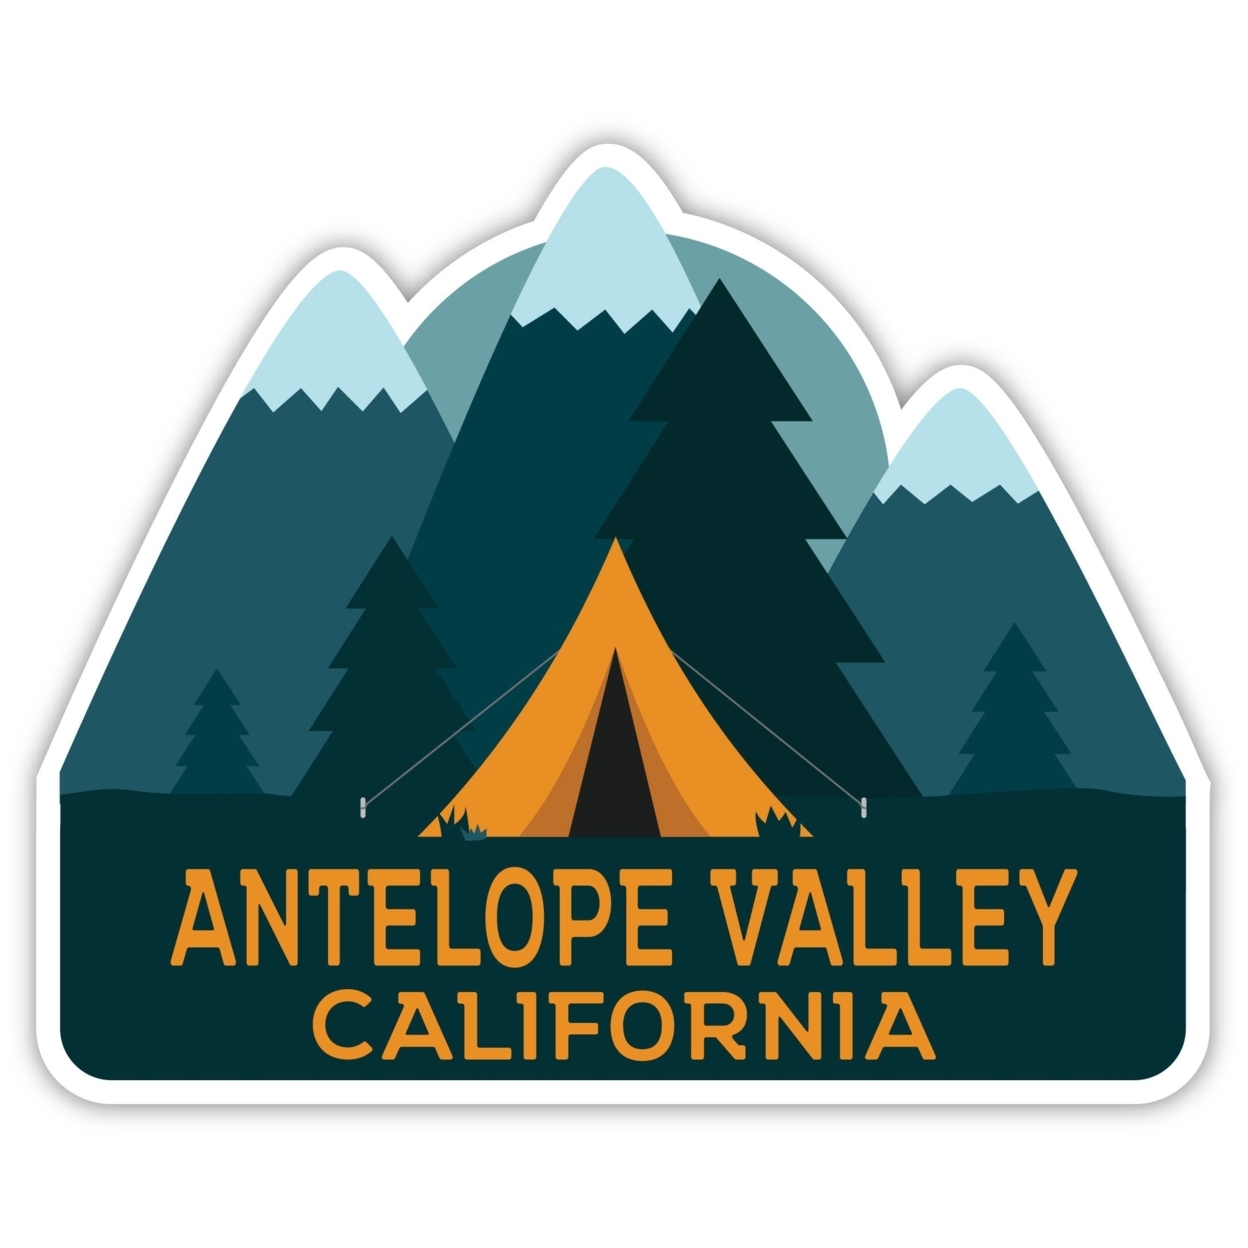 Antelope Valley California Souvenir Decorative Stickers (Choose Theme And Size) - 4-Pack, 2-Inch, Tent